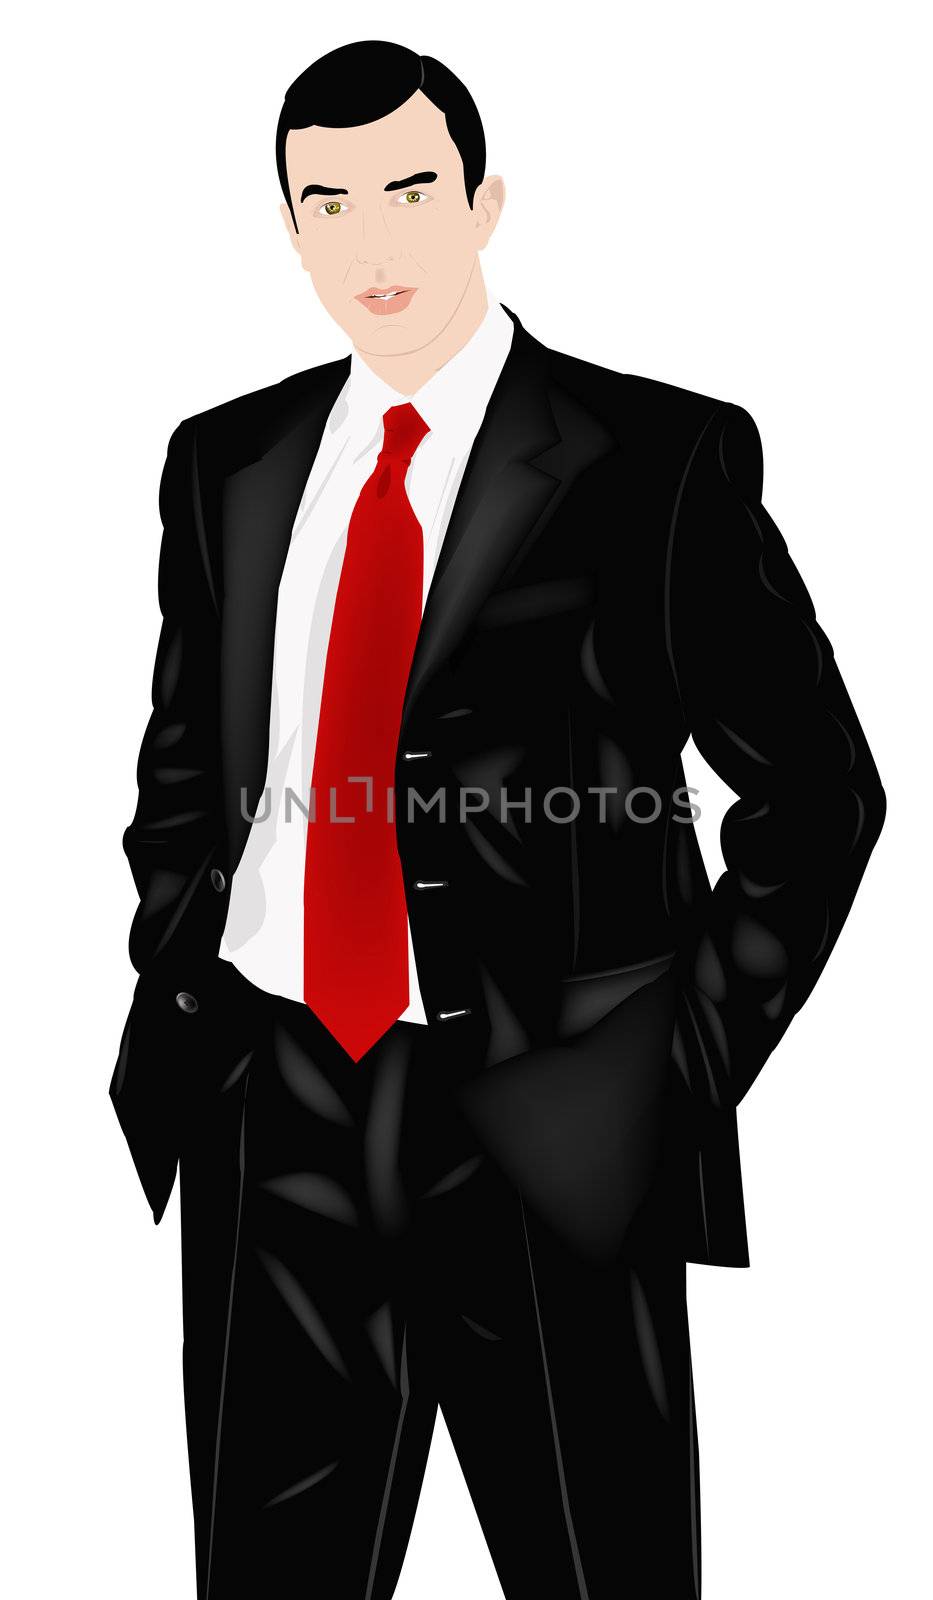 The successful elegant businessman on a white background.